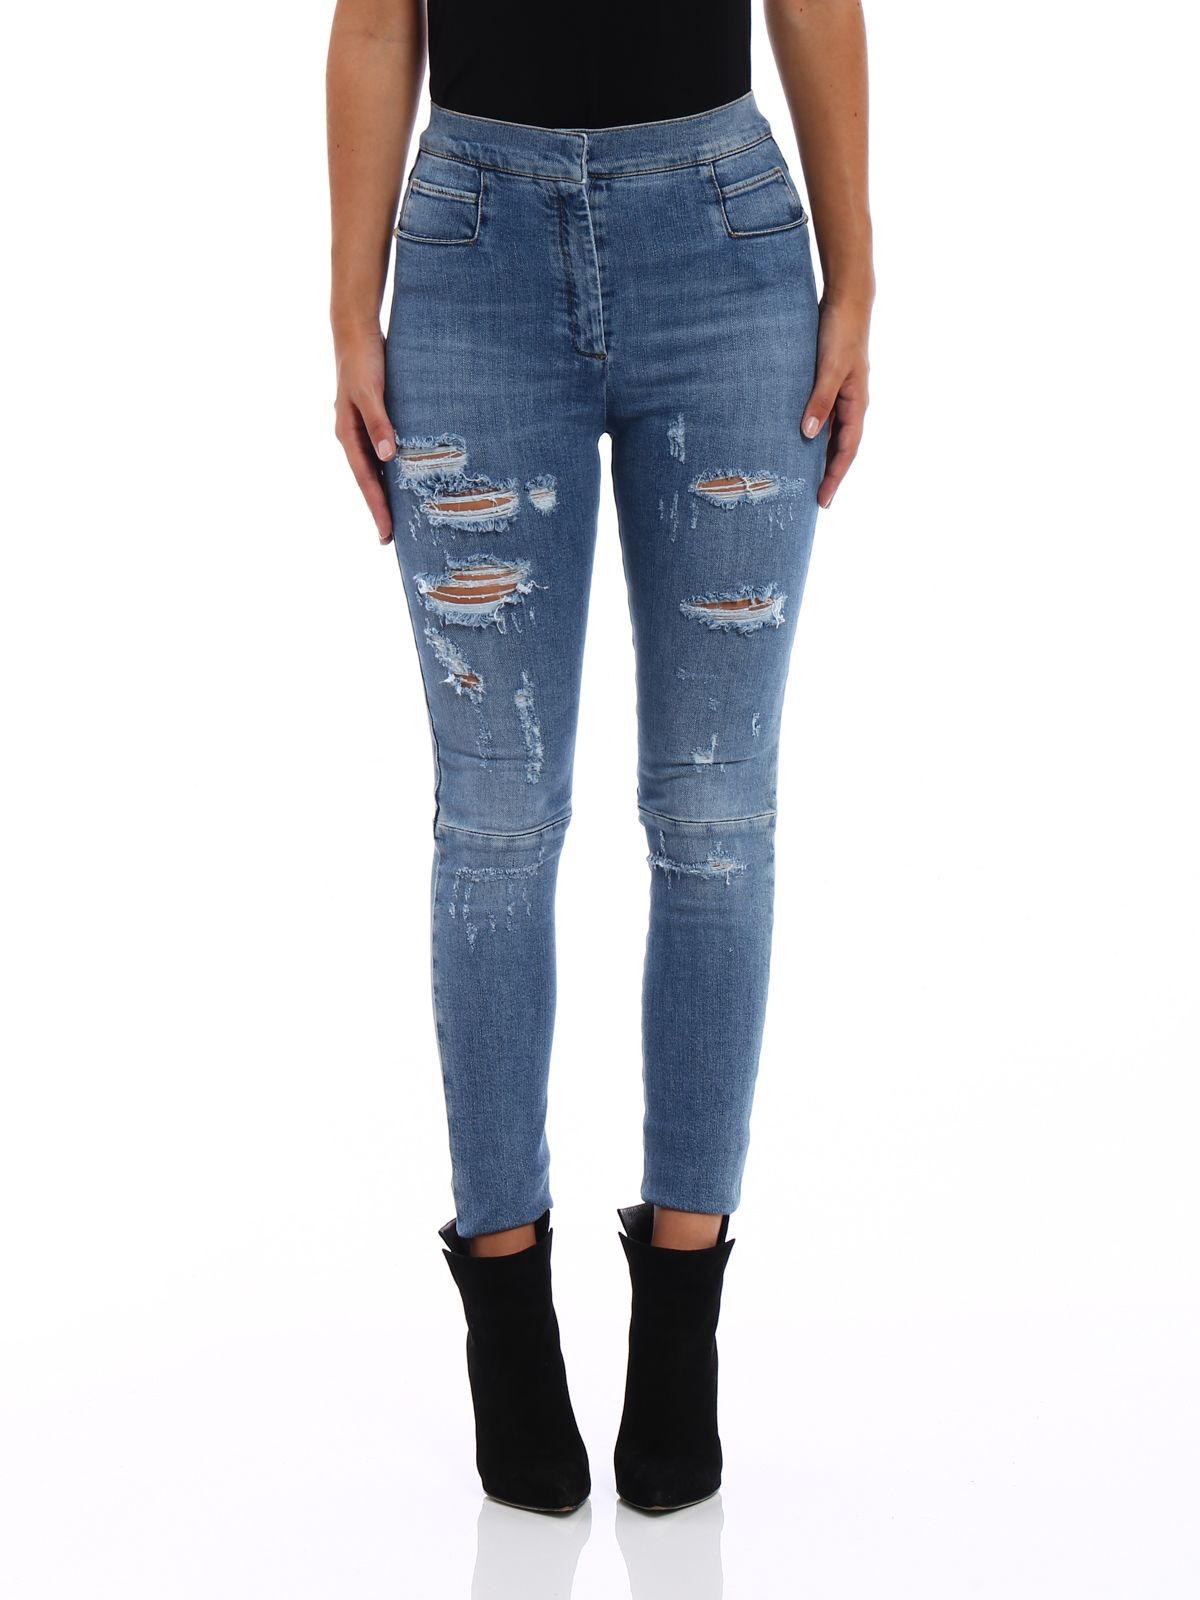 Balmain - Ripped High Waisted Skinny Jeans - Blue, Women's Jeans | Italist